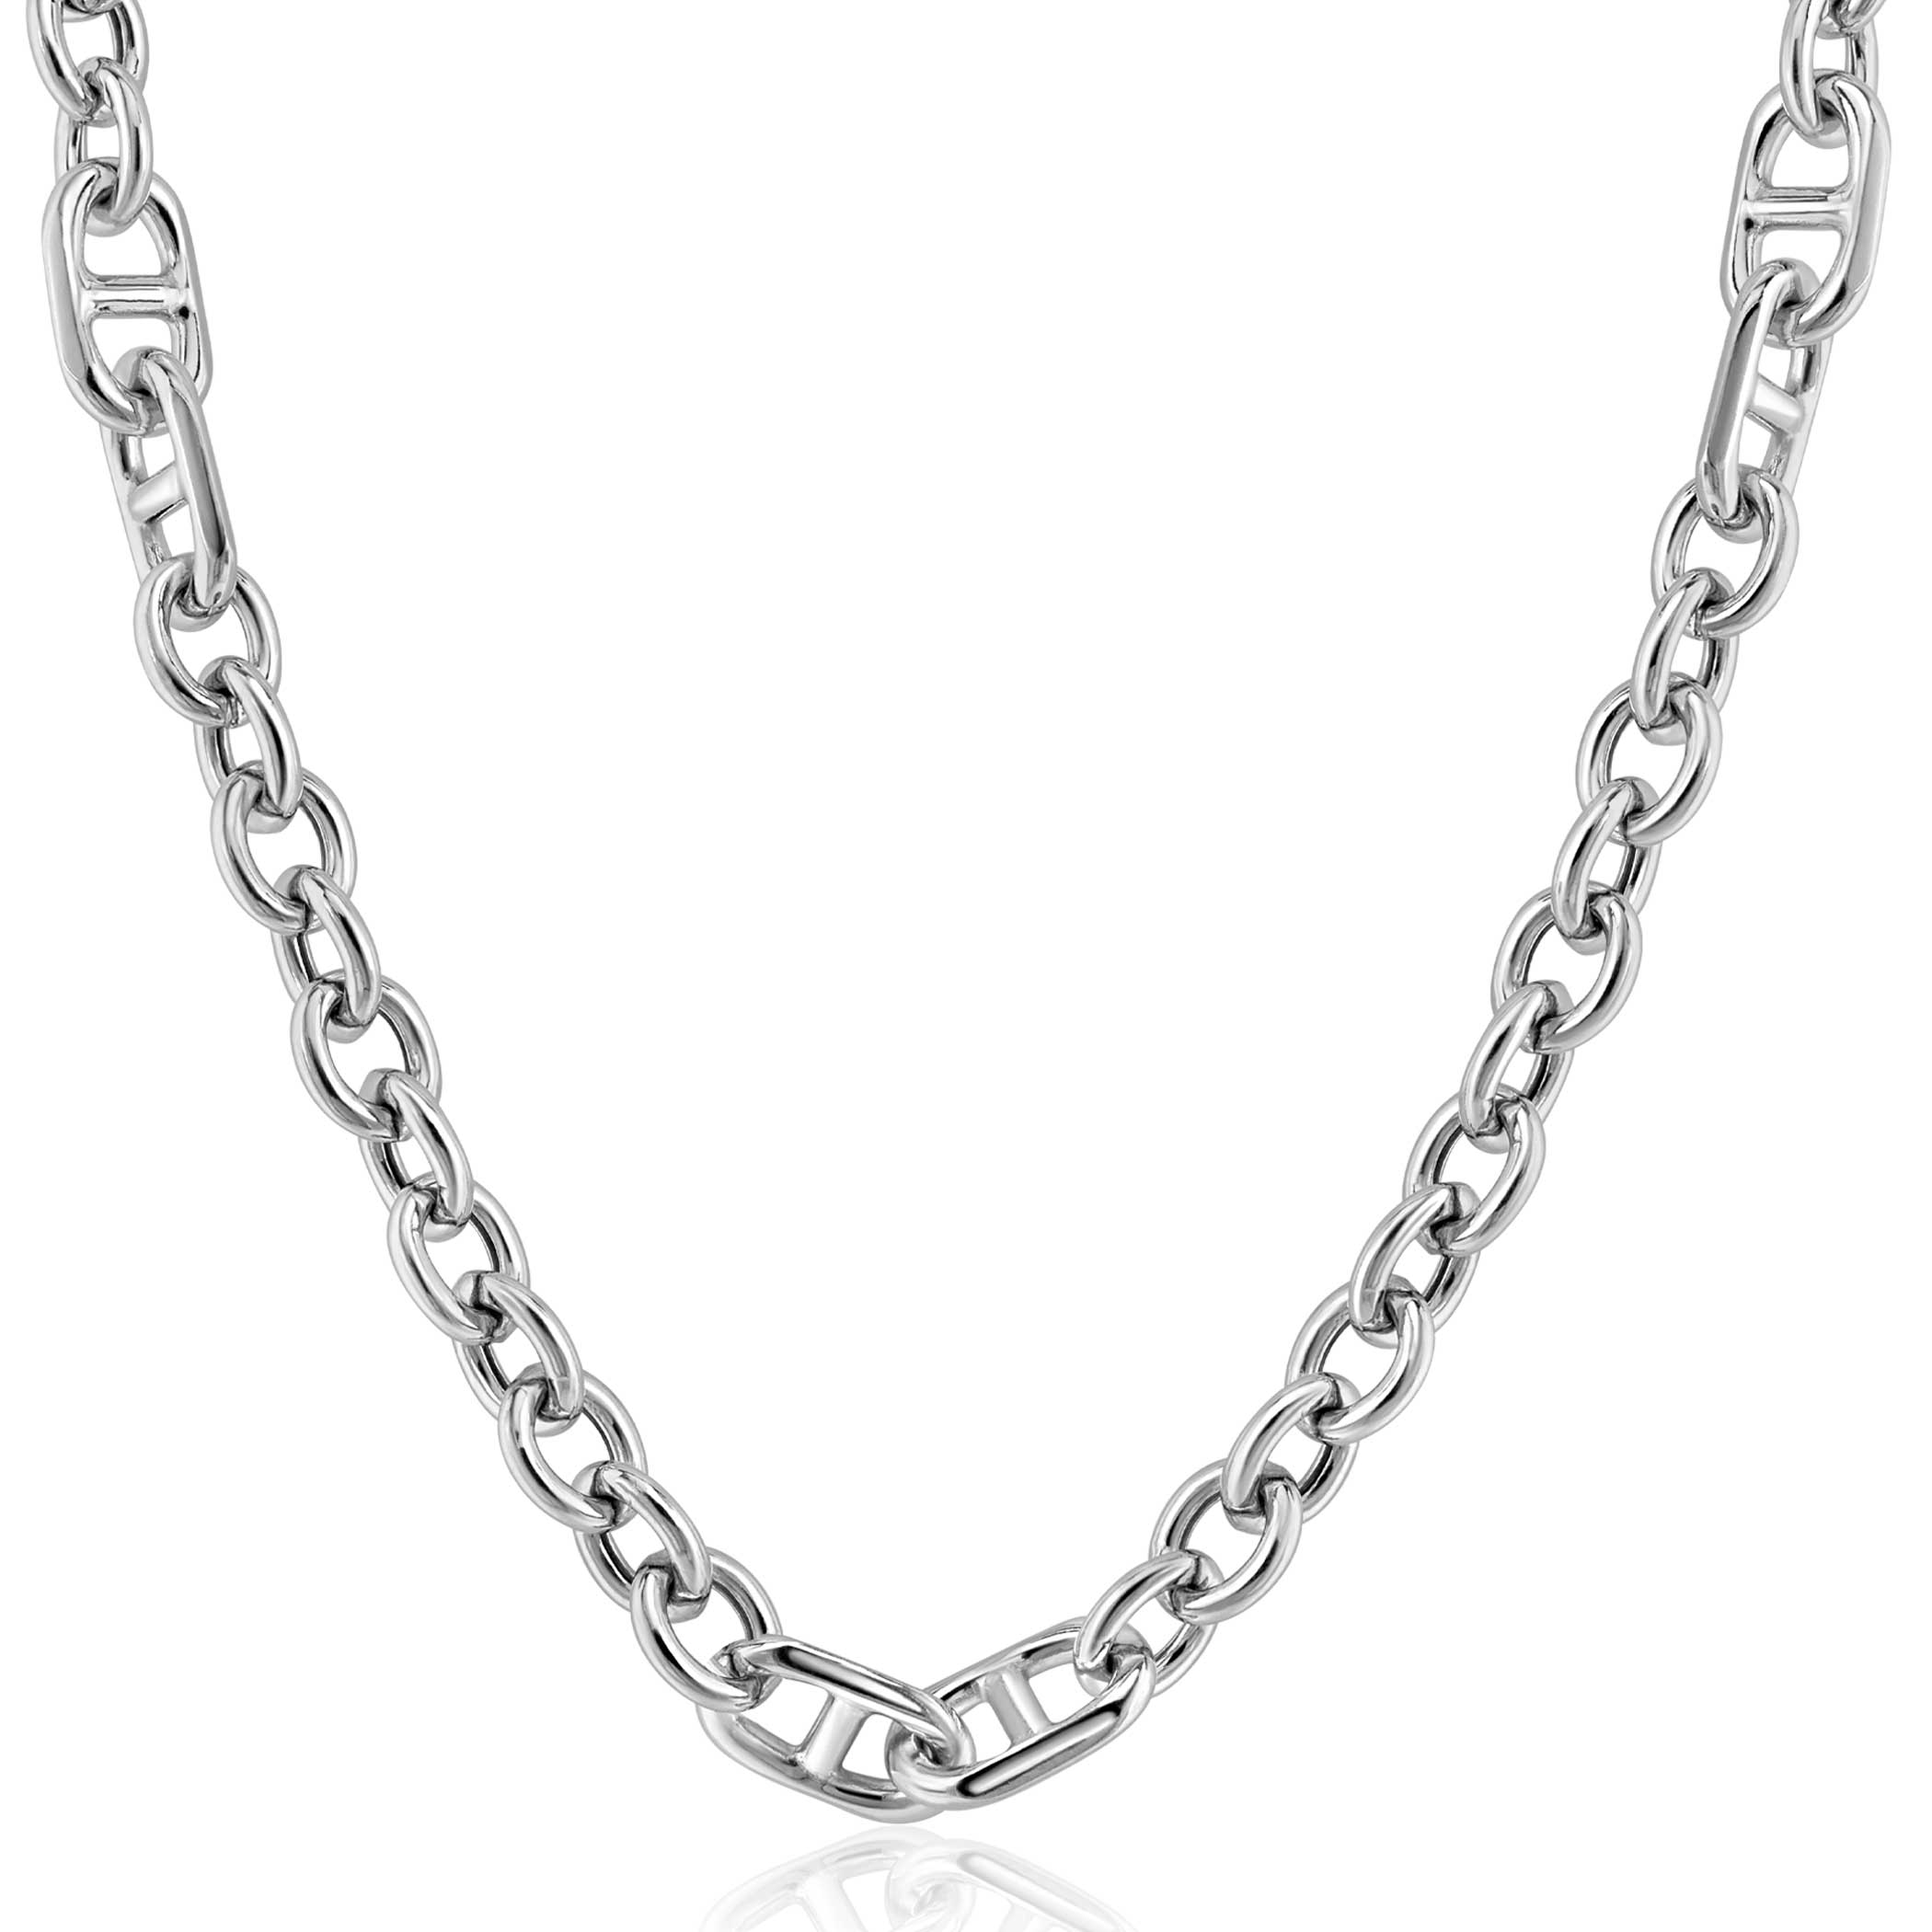 ZINZI silver link necklace, combining round links with trendy larger navy links 7.4mm wide 42-45cm ZIC2580
